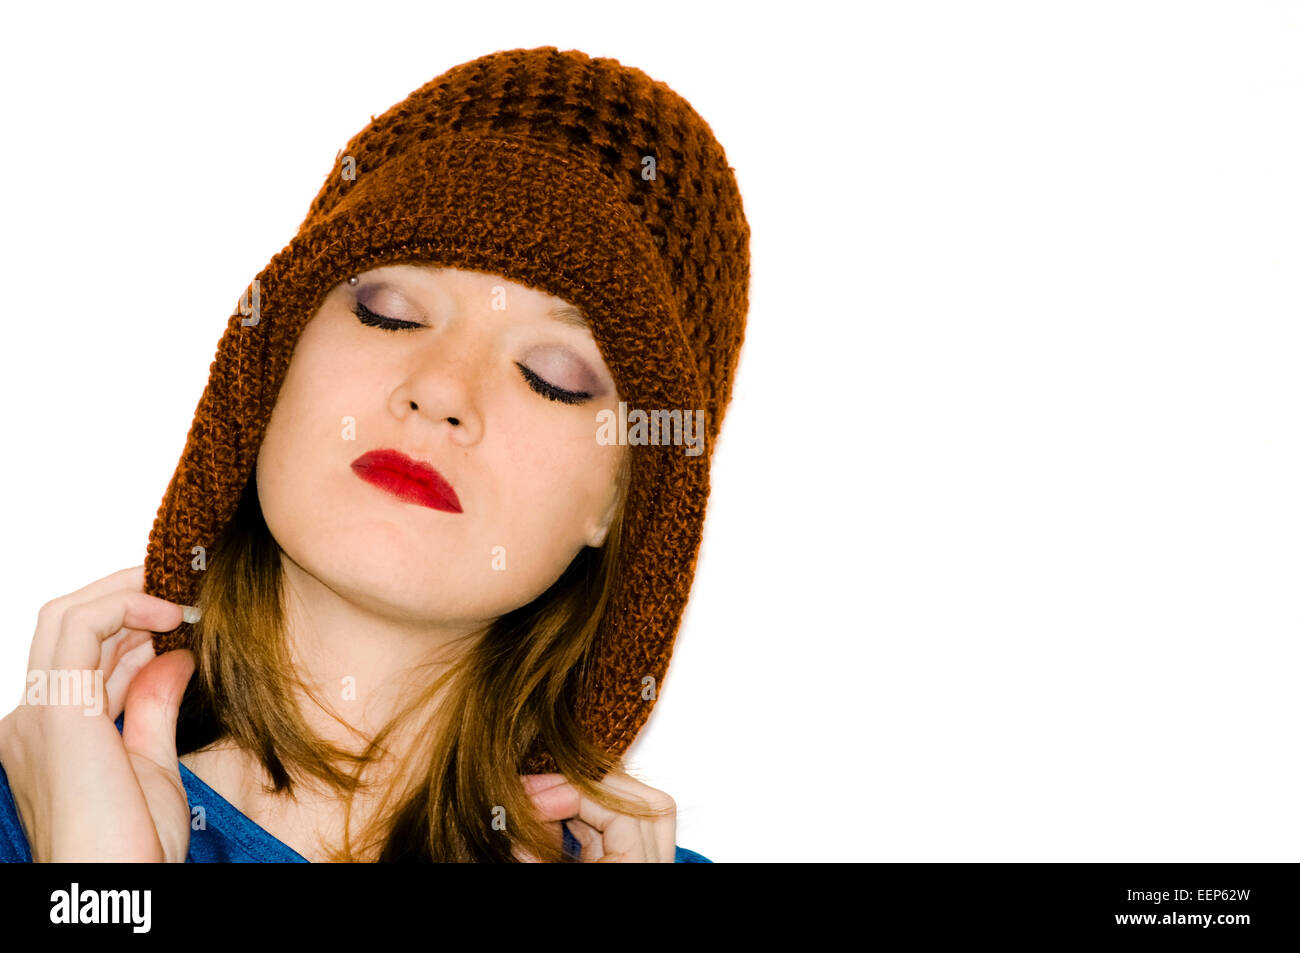 Beautiful woman wearing a burgundy knitted hat her head raised slightly upwards eyes closed and bright red lips Stock Photo